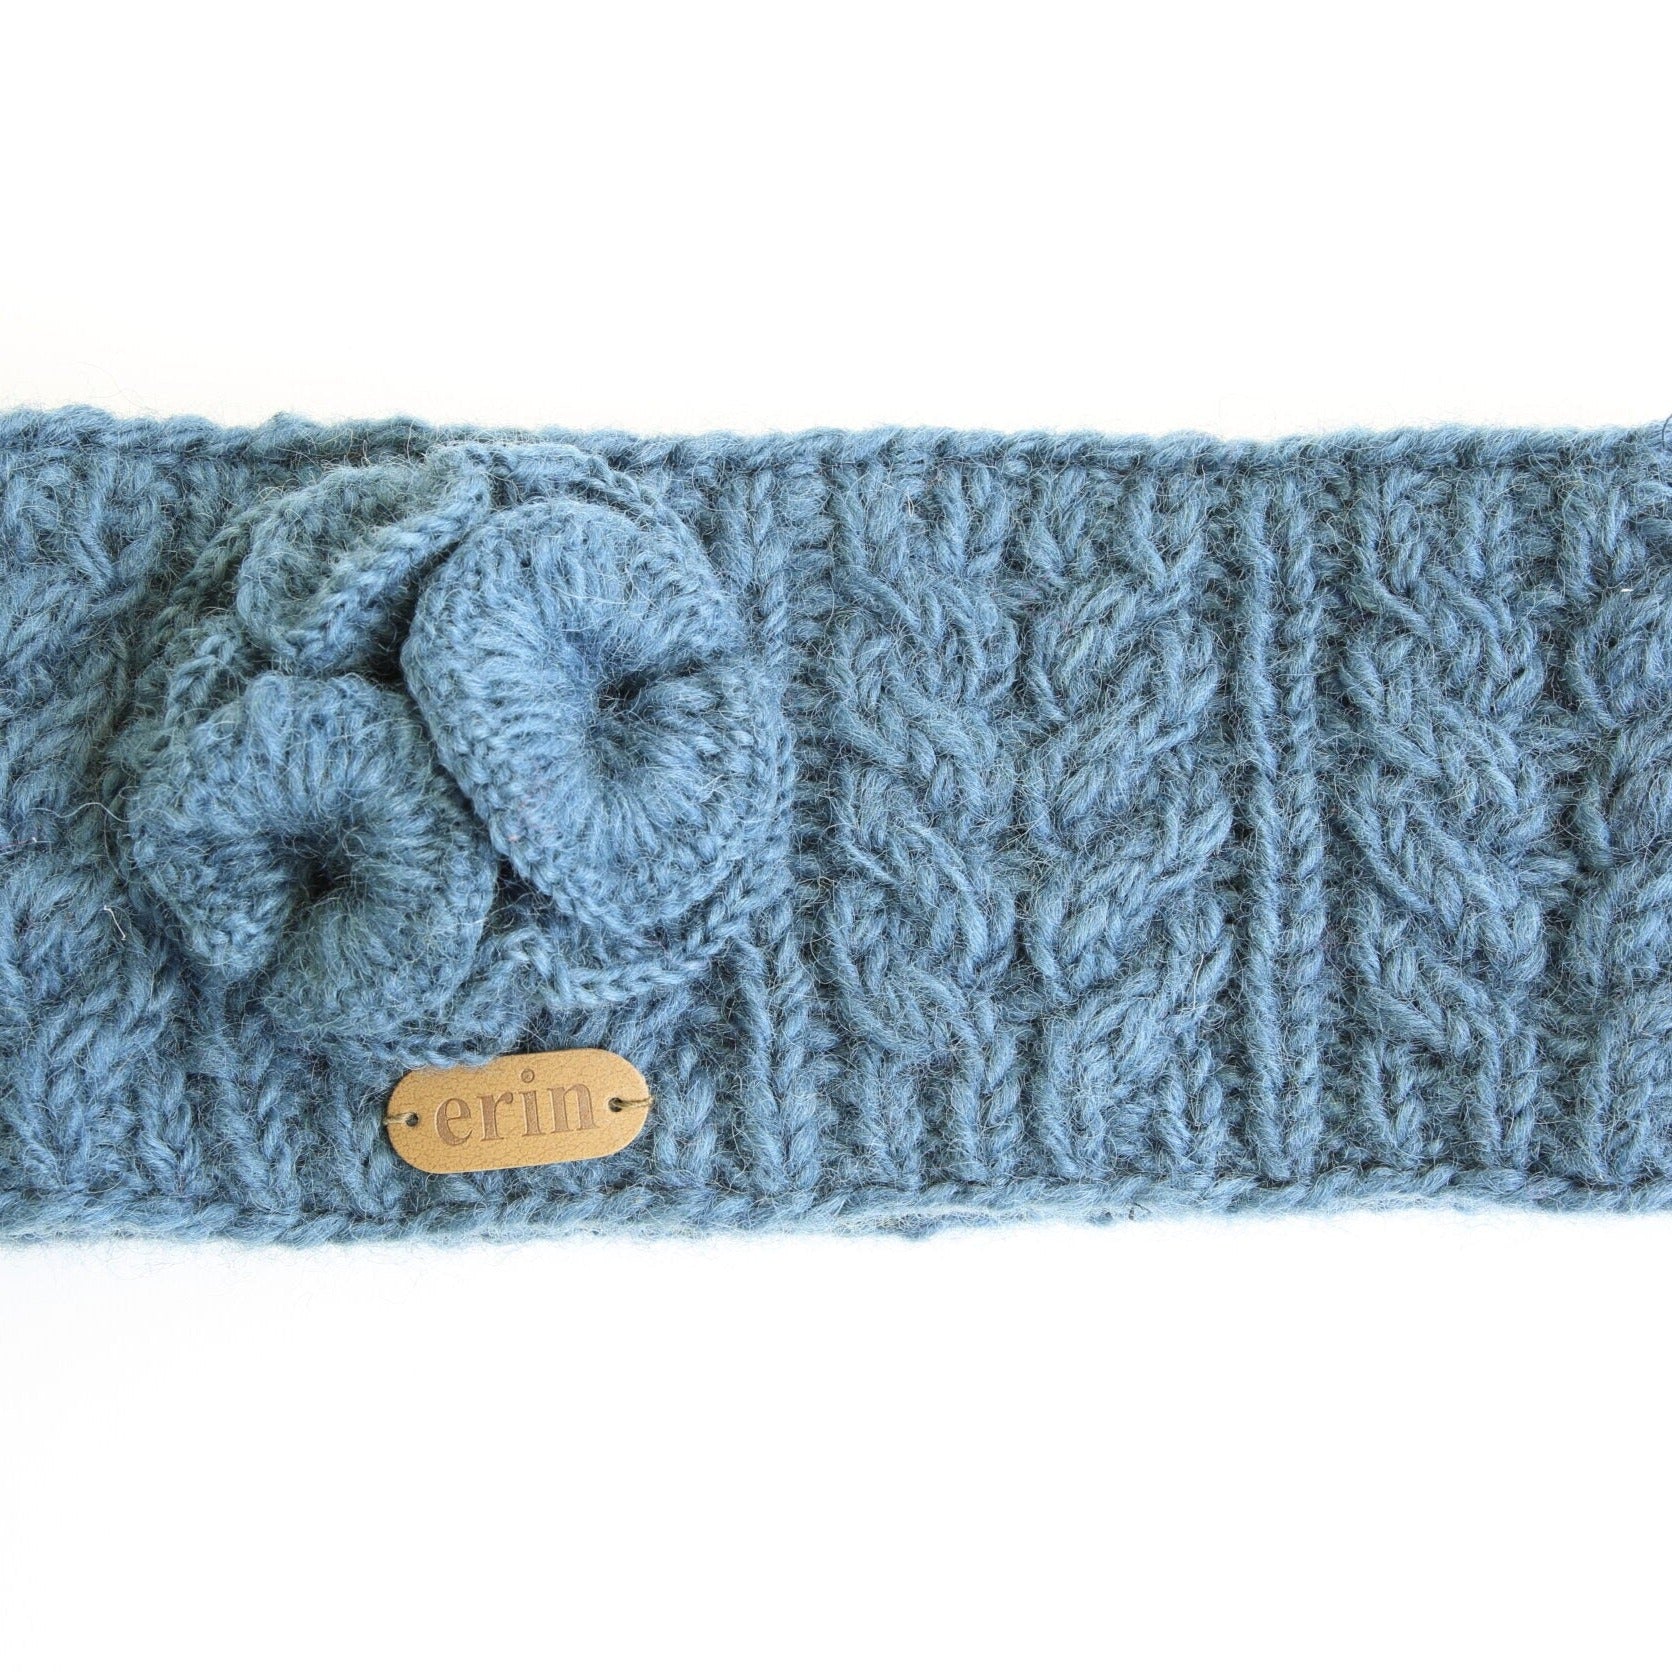 Aran Cable Headband with Flower by Erin knitwear